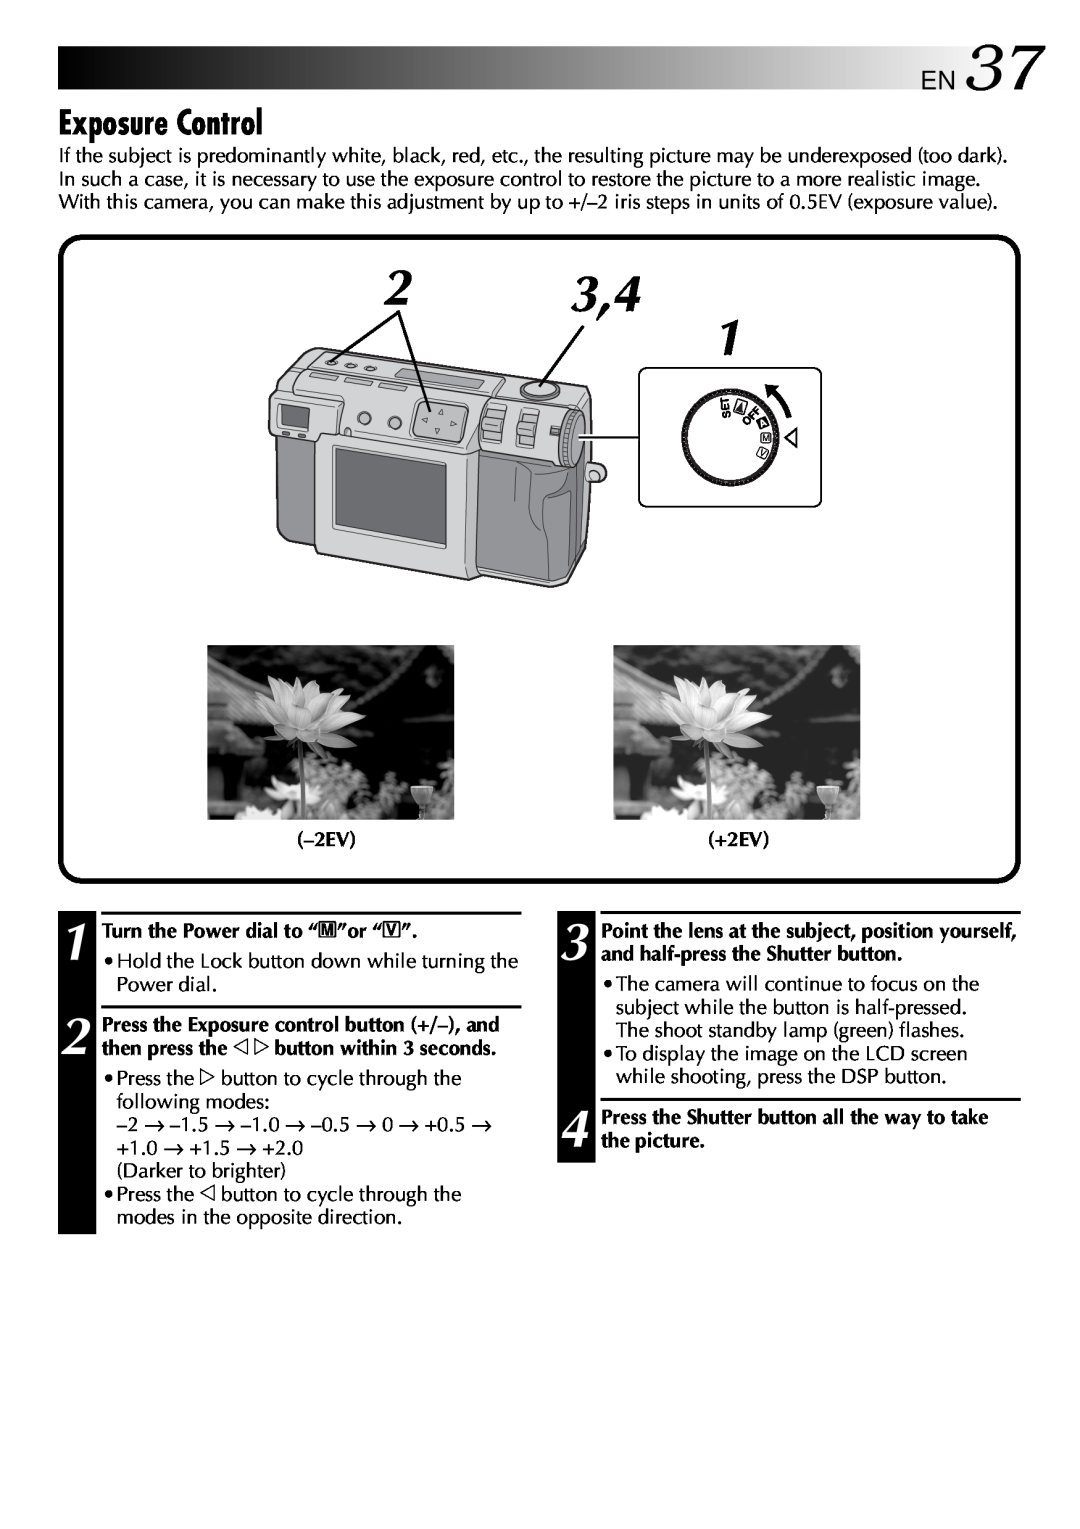 JVC GC-QX3 manual Exposure Control, EN37, 2 3,4, +2EV, Press the Shutter button all the way to take the picture 